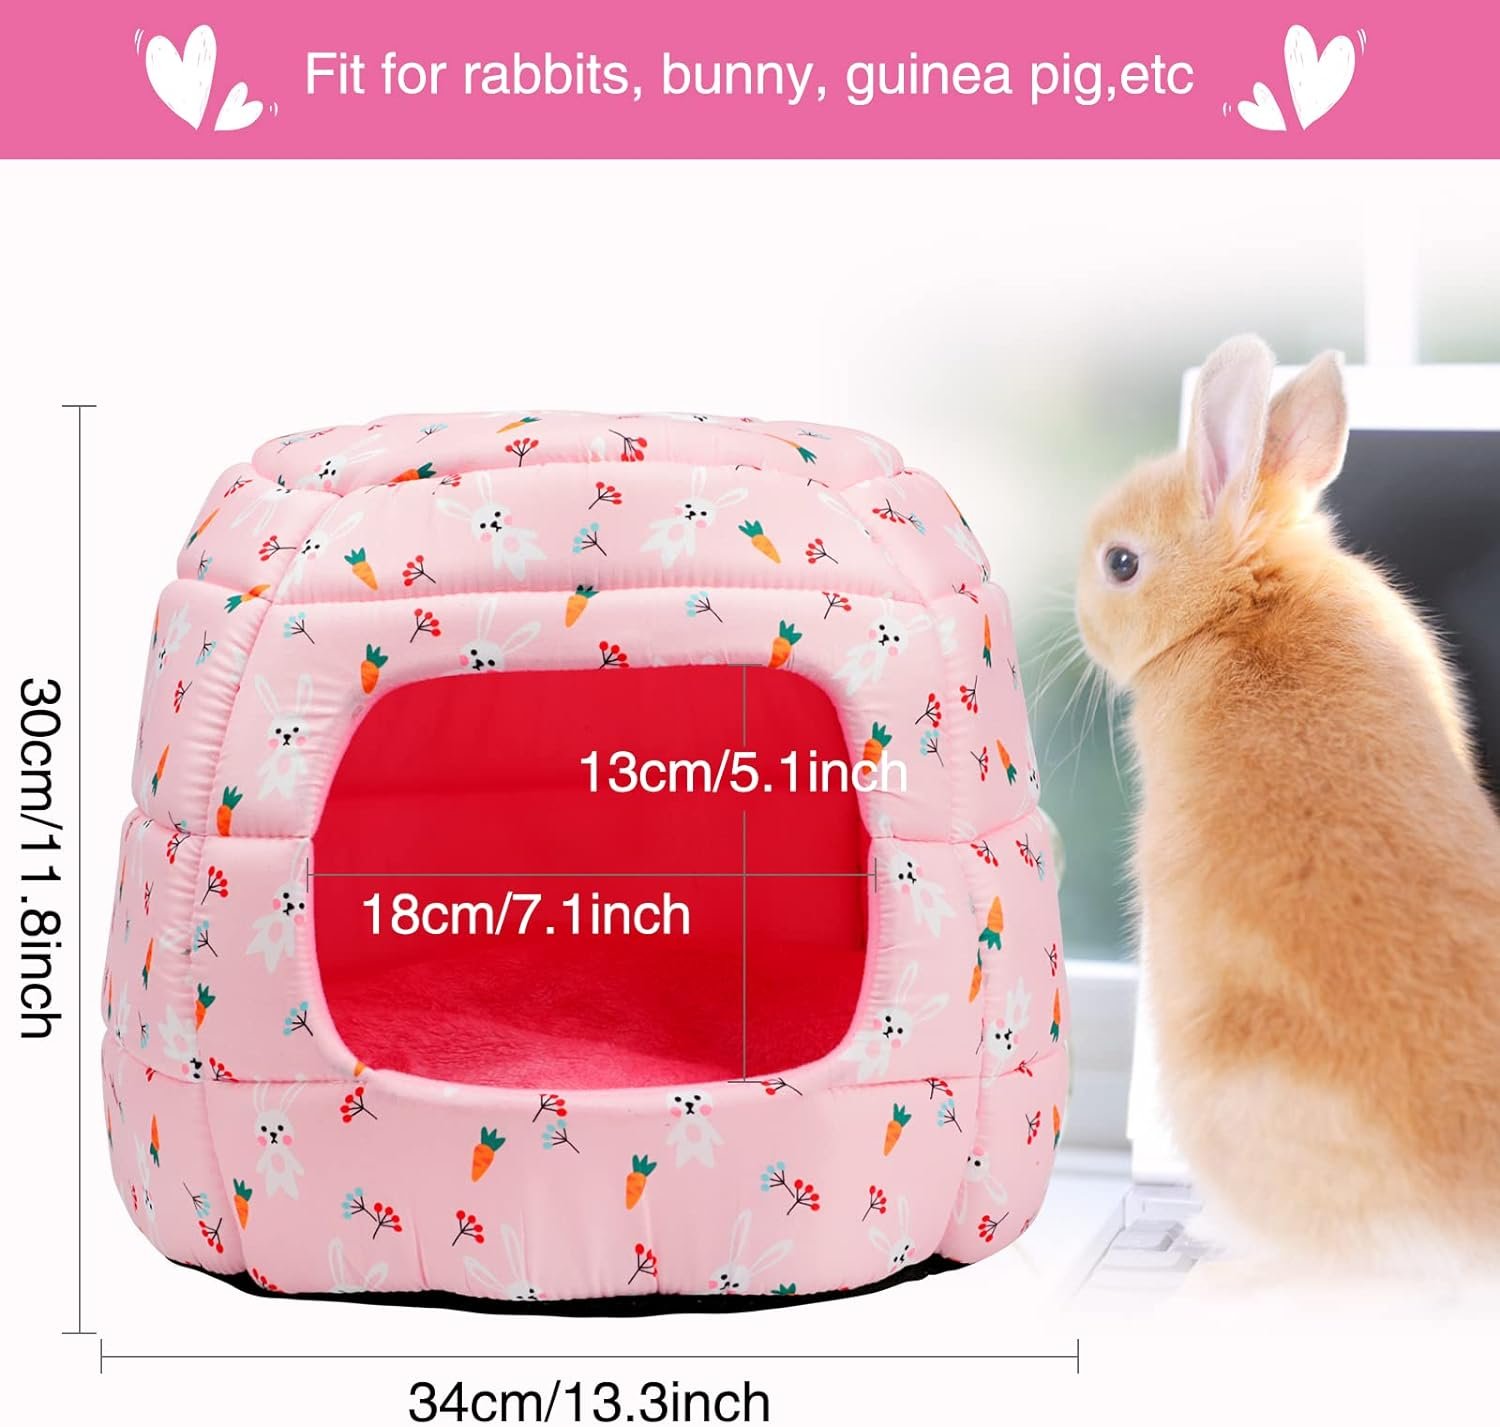 YUEPET Large Rabbit Bed House Foldable Winter Warm Bunny Hideout Cave for Guinea Pig Hamster Squirrel Ferret Hedgehog Chinchilla Cozy Cage Accessories